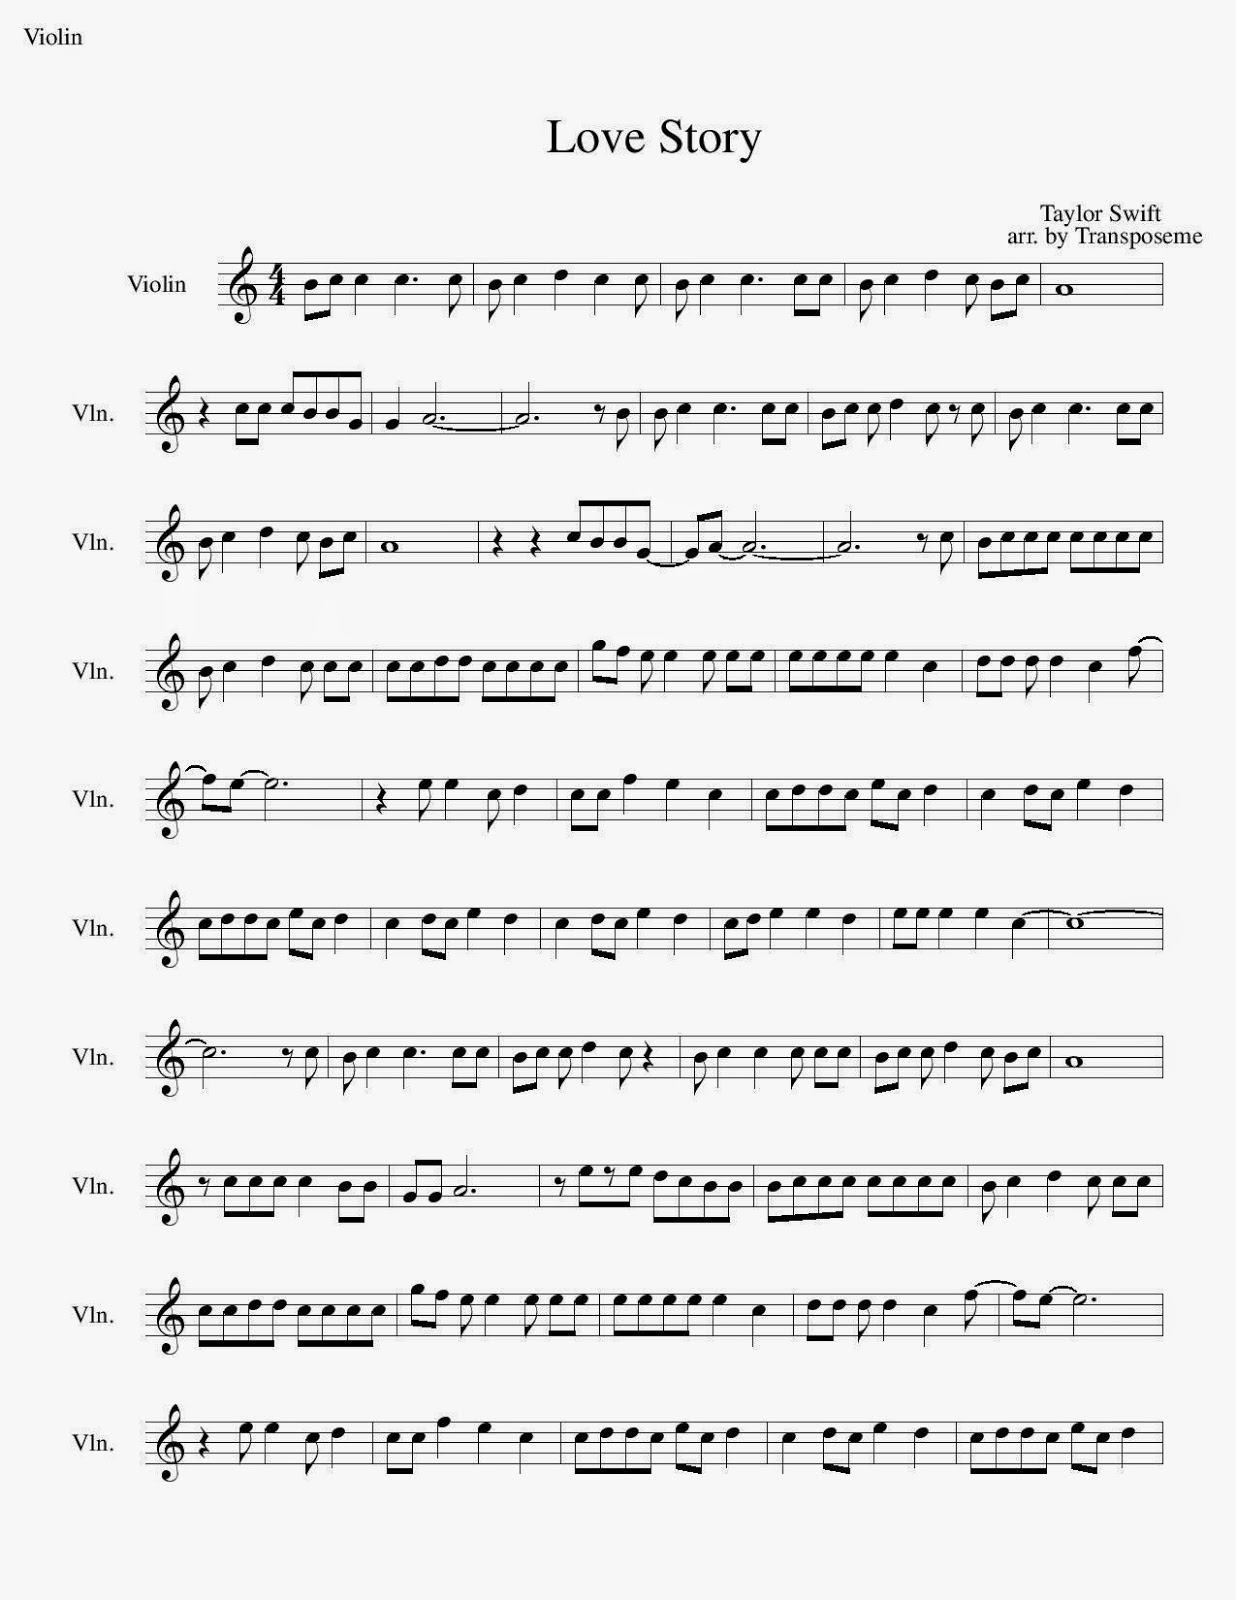 Musical Mania: Love Story by Taylor Swift Violin Sheet Music